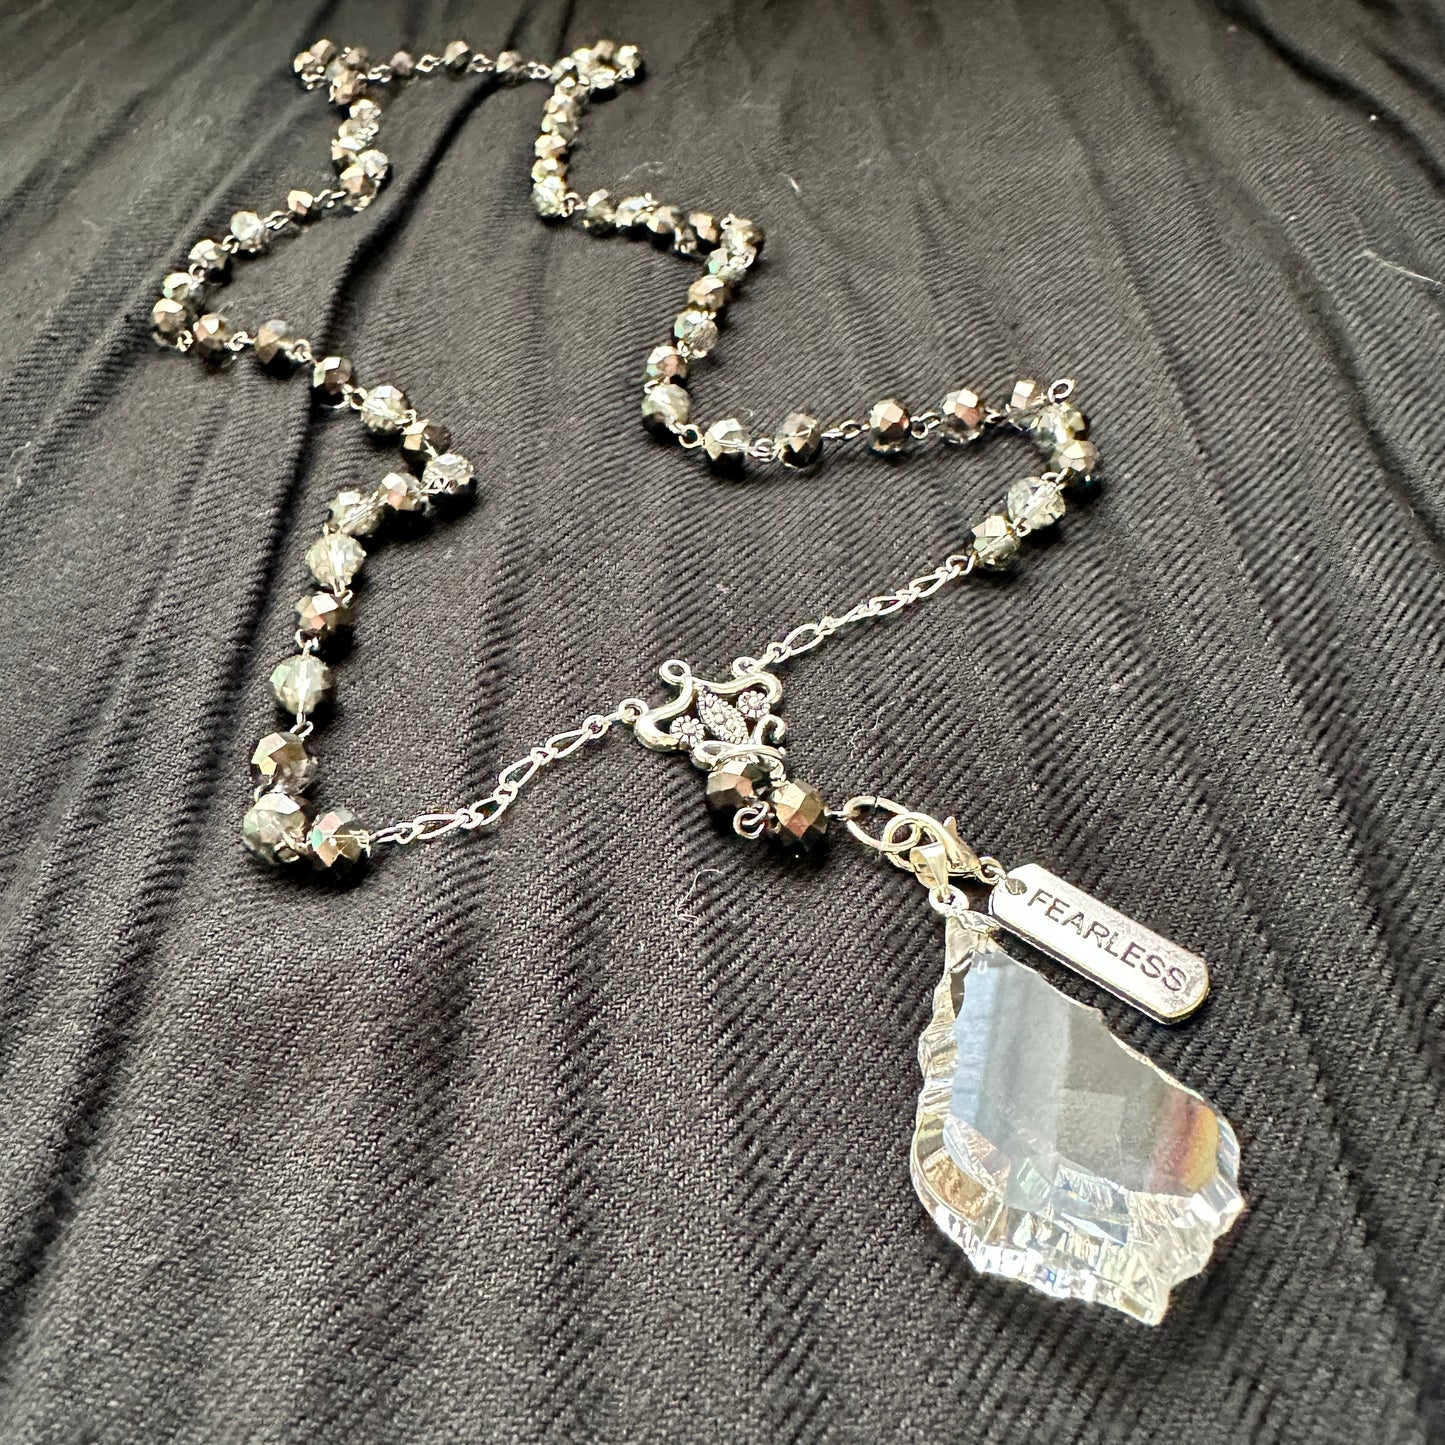 "Fearless" Boho Beaded Chain Necklace